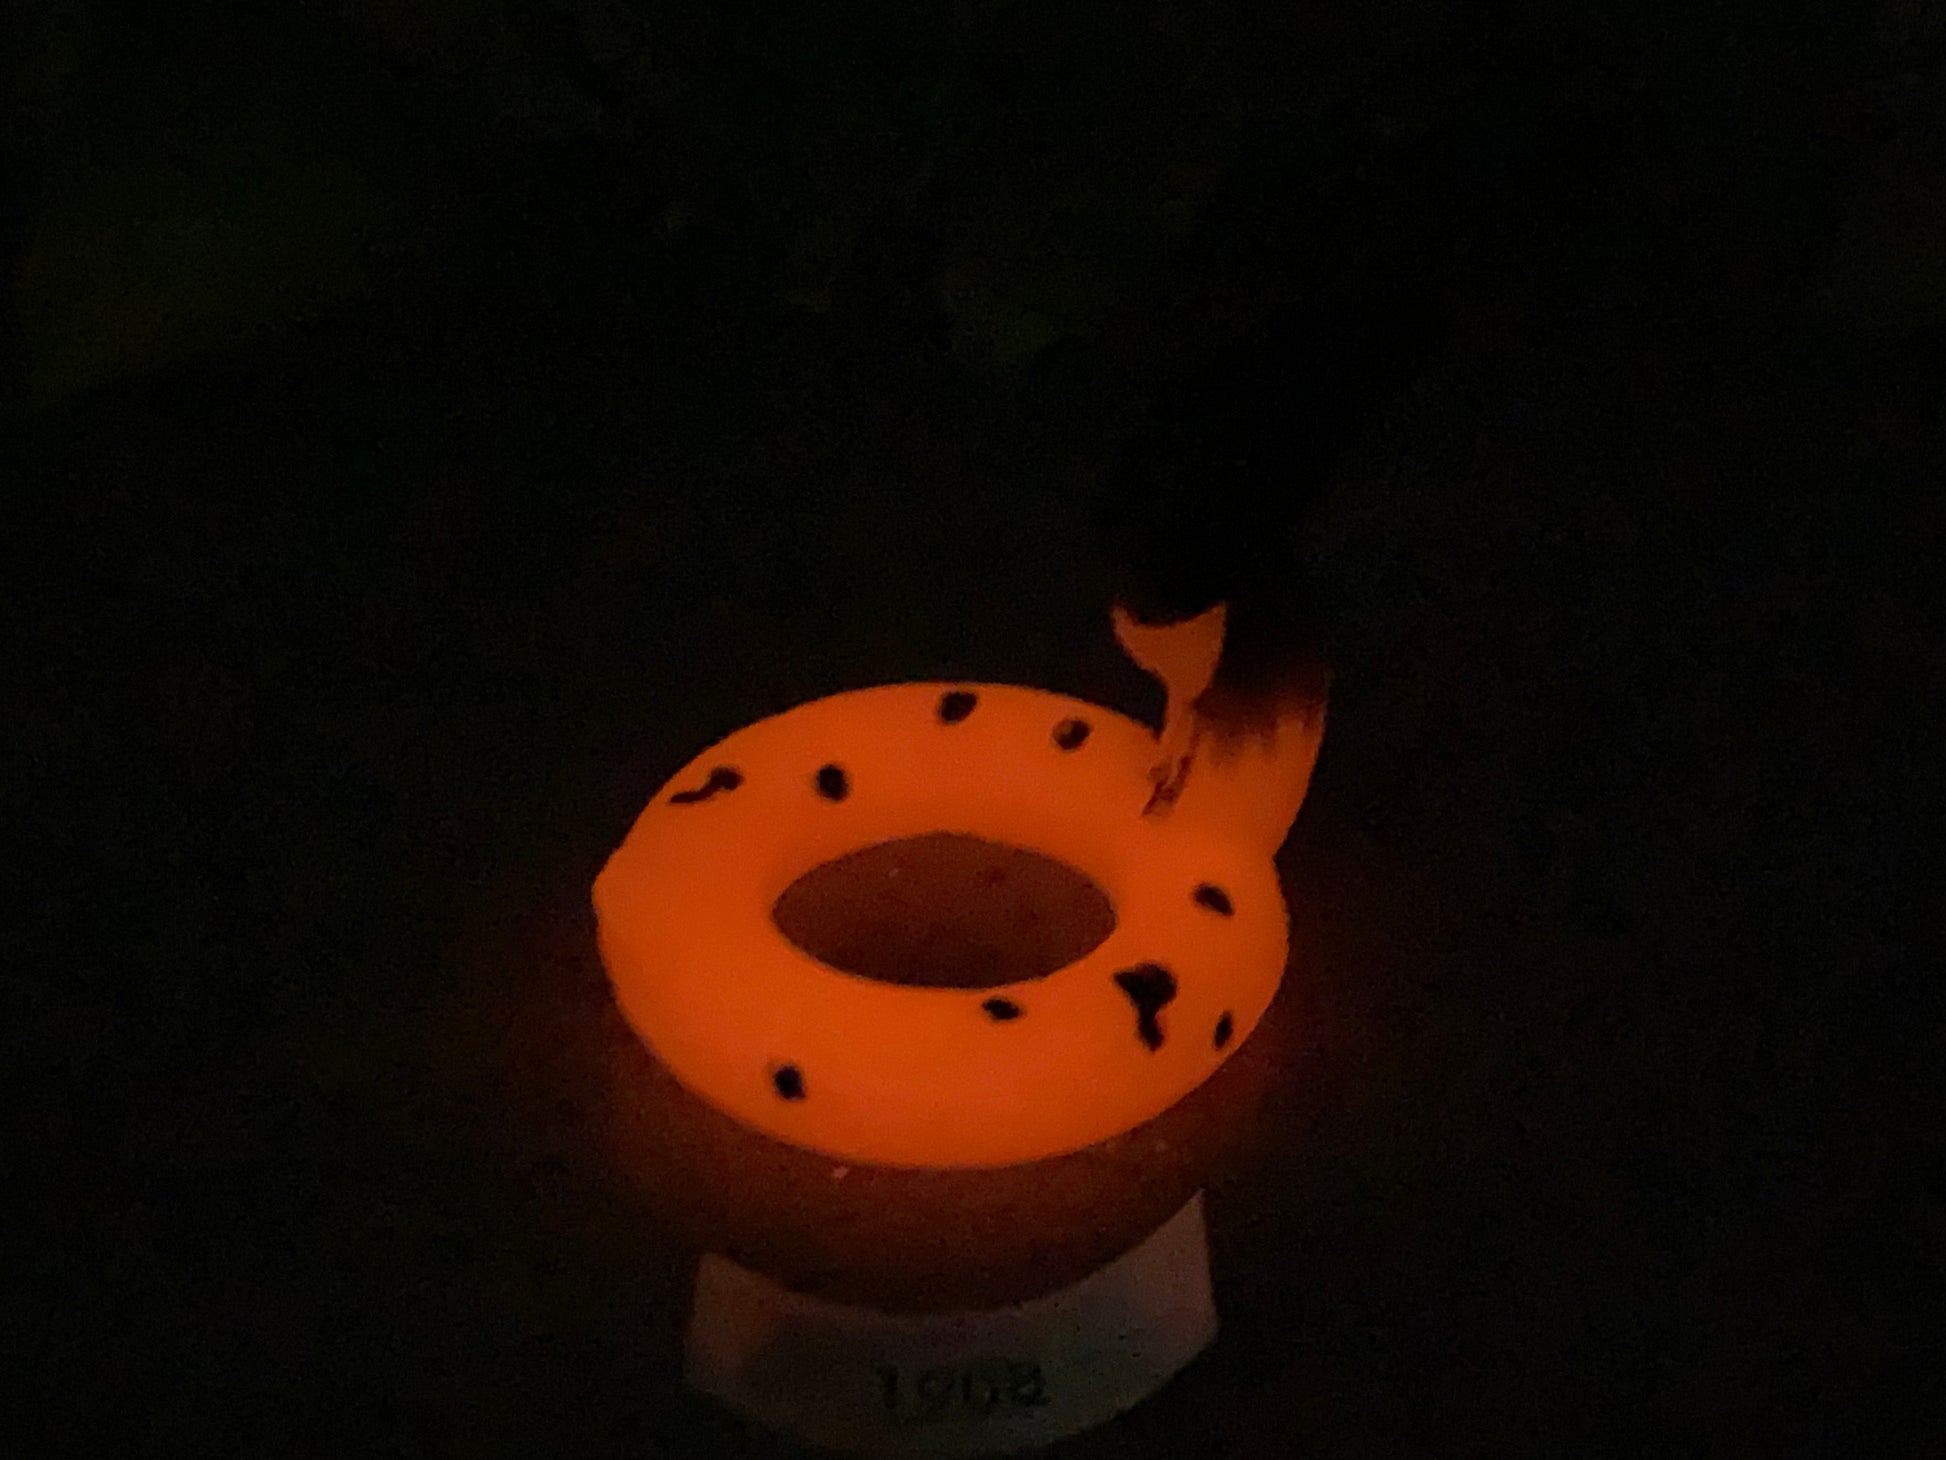 a lit up toilet seat in the dark